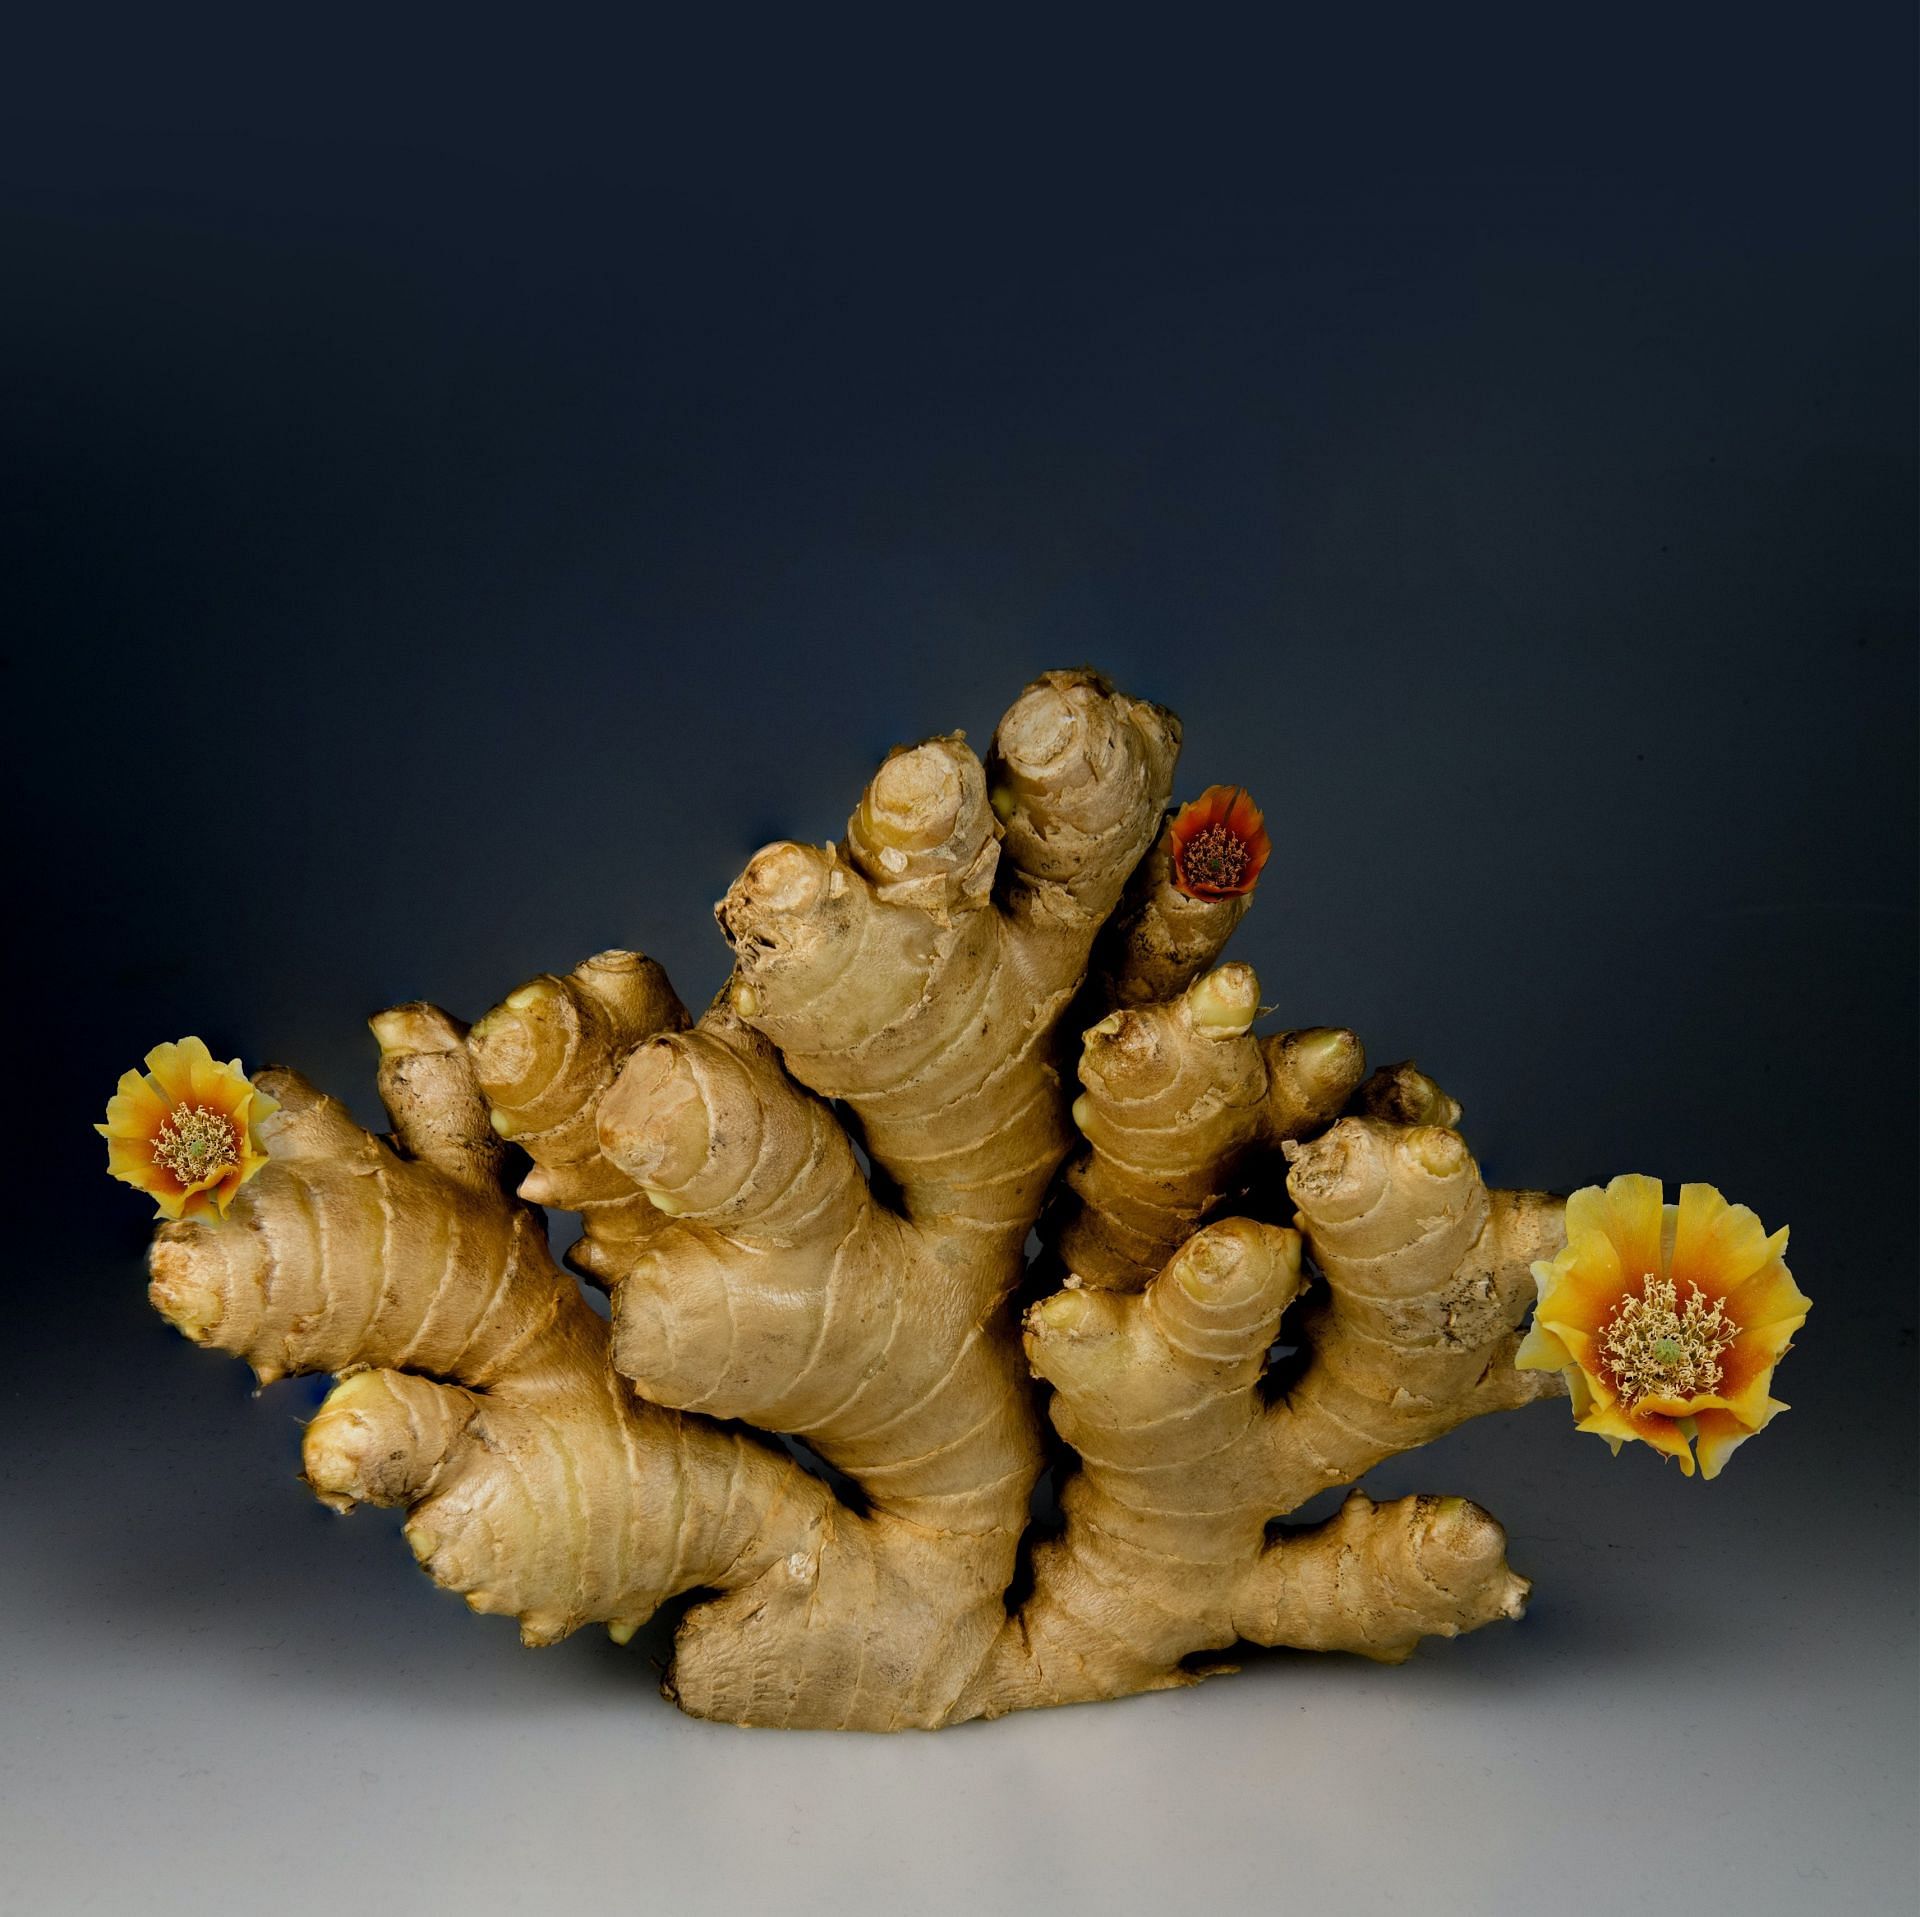 A famous ingredient in every household, ginger has many medicinal and health benefits.(Photo by Joris Neyt via pexels)